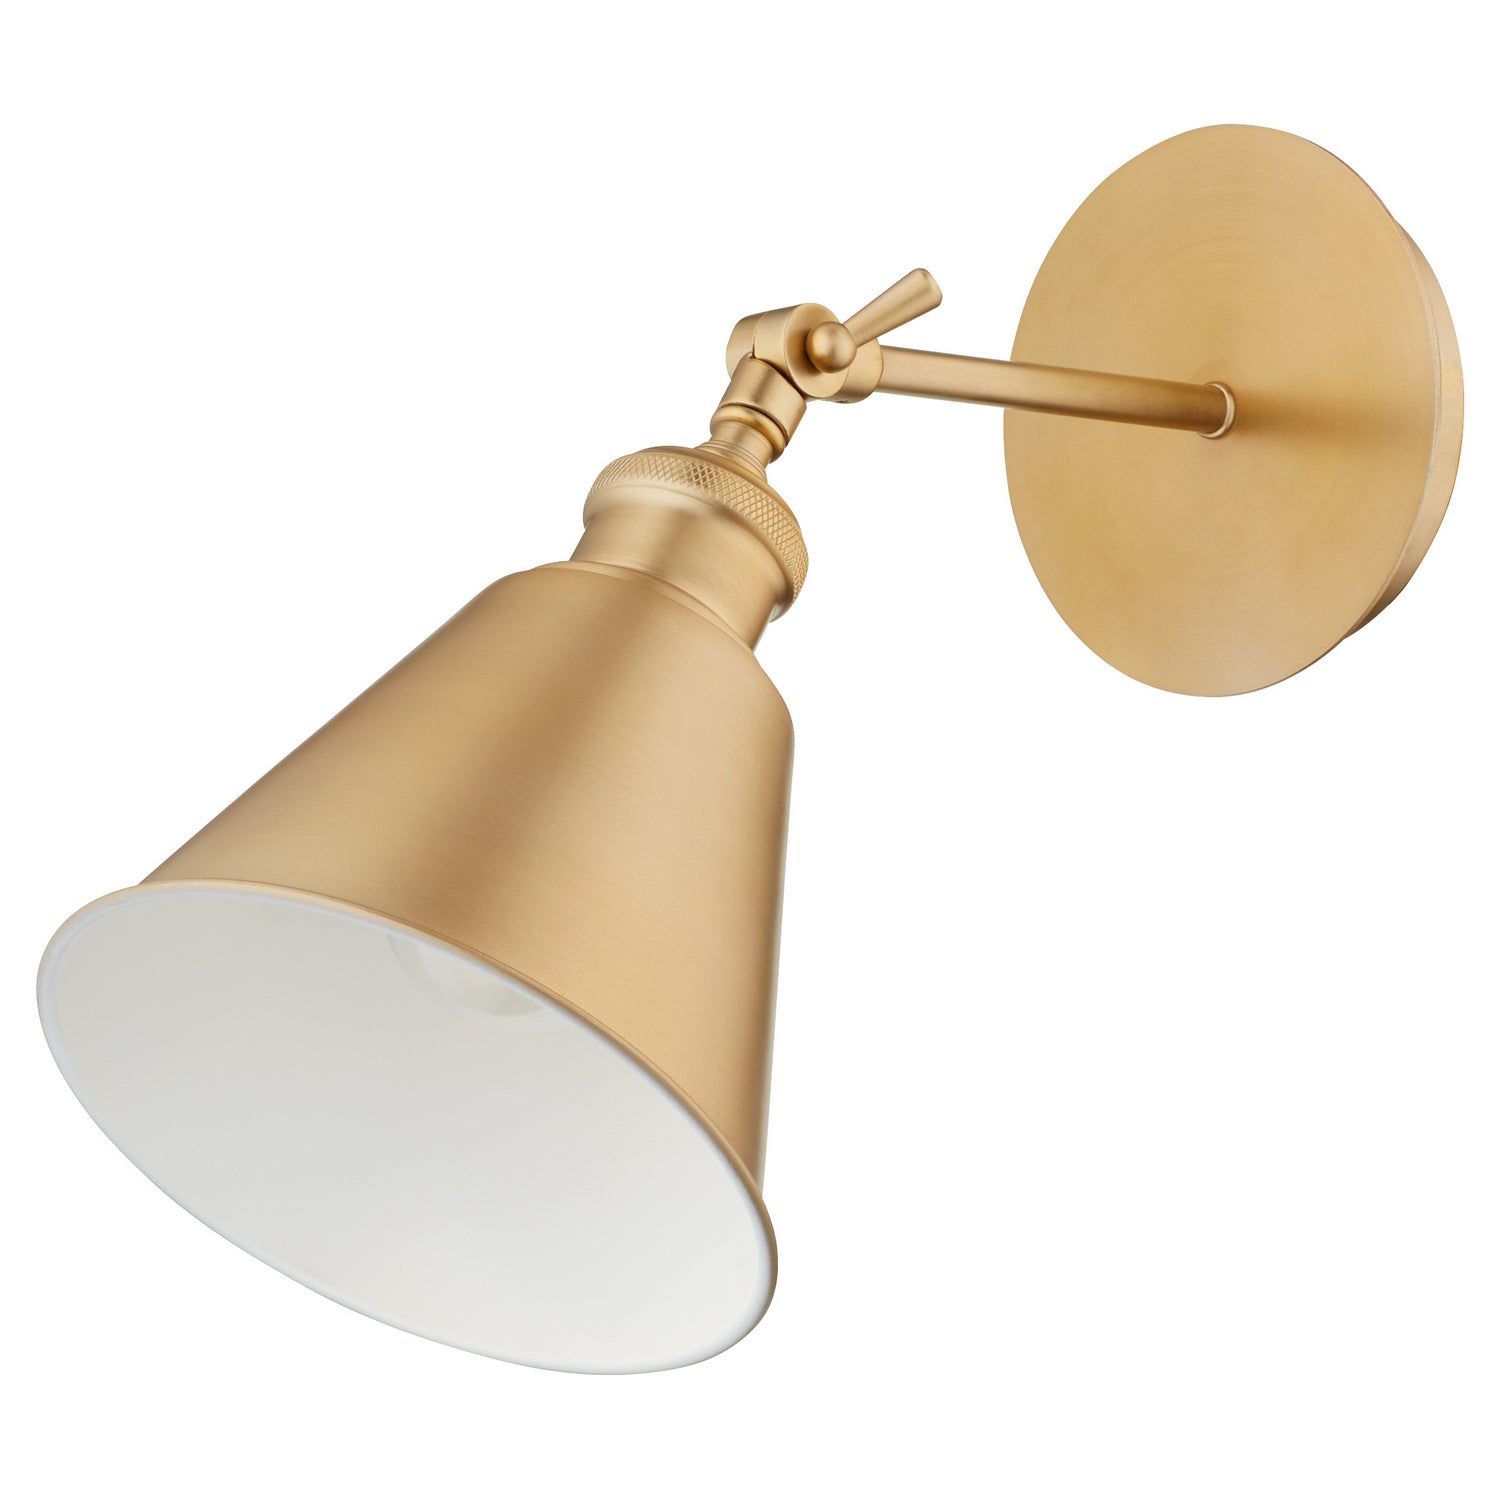 Quorum Metal Cone 5390-80 Wall Sconce Light - Aged Brass